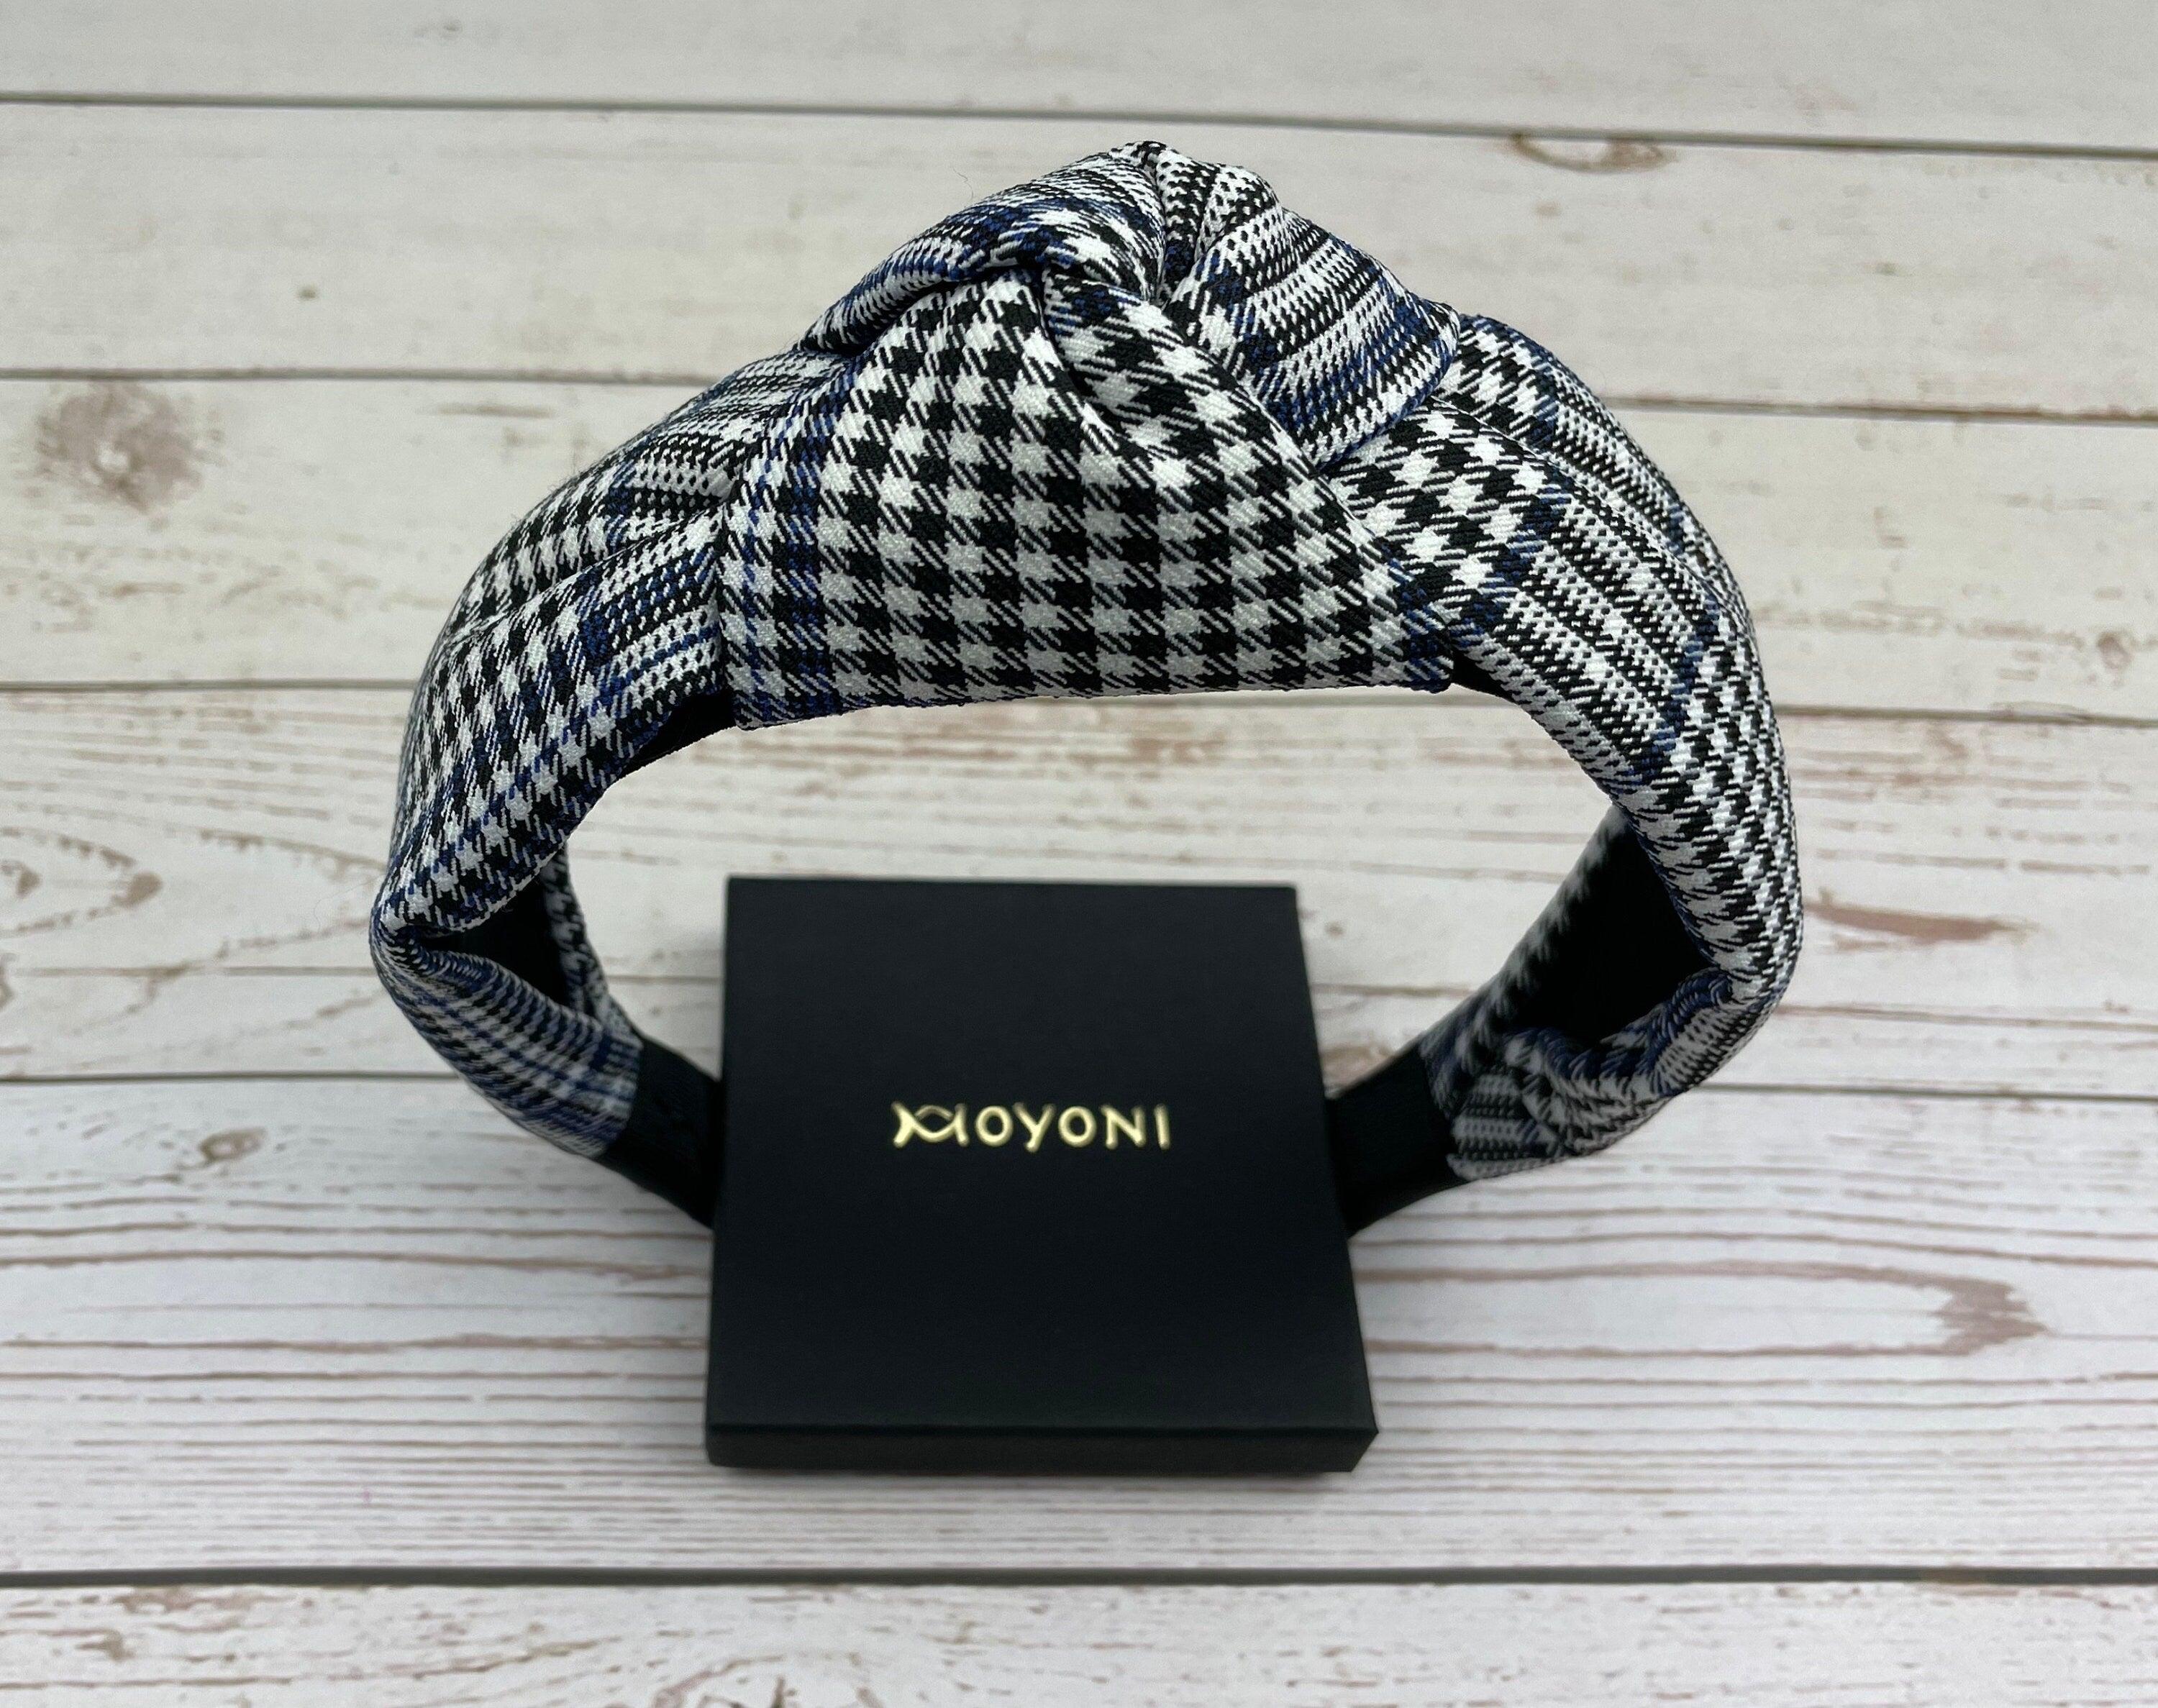 High-Quality Classic Knotted Headband in Crepe White and Black with Dark Blue Stripes - Fashionable Hair Accessory for Women, Perfect for College available at Moyoni Design